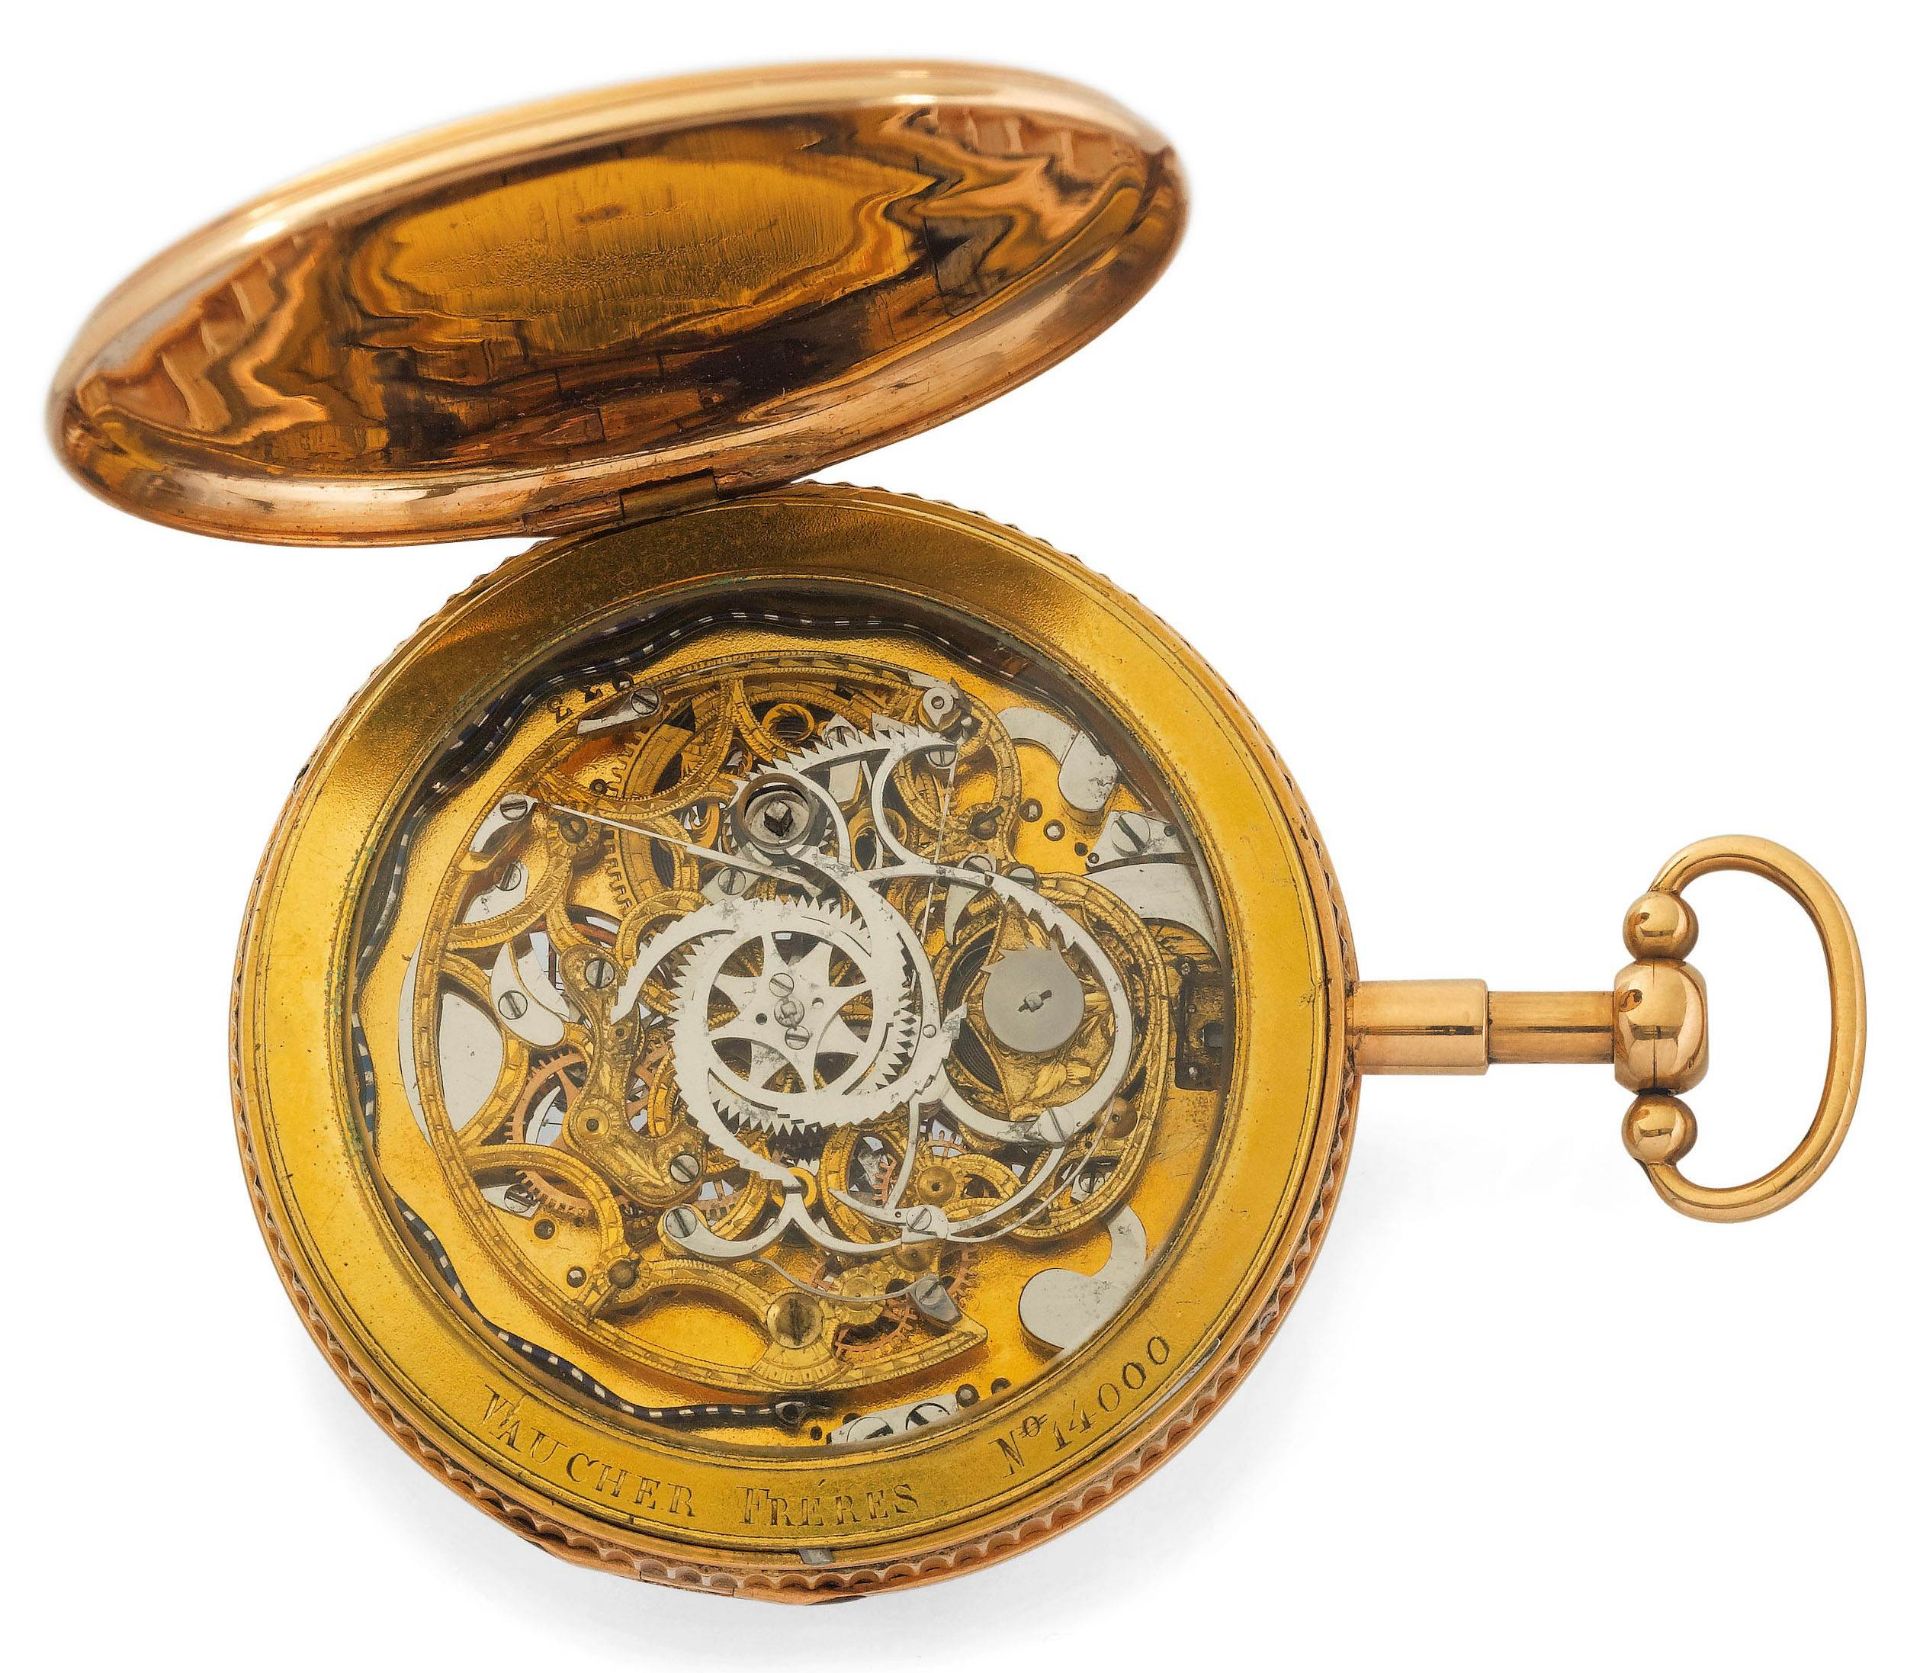 Vaucher Fréres, rare, attractive, large skeleton watch with minute repeater, ca. 1780. - Image 2 of 3